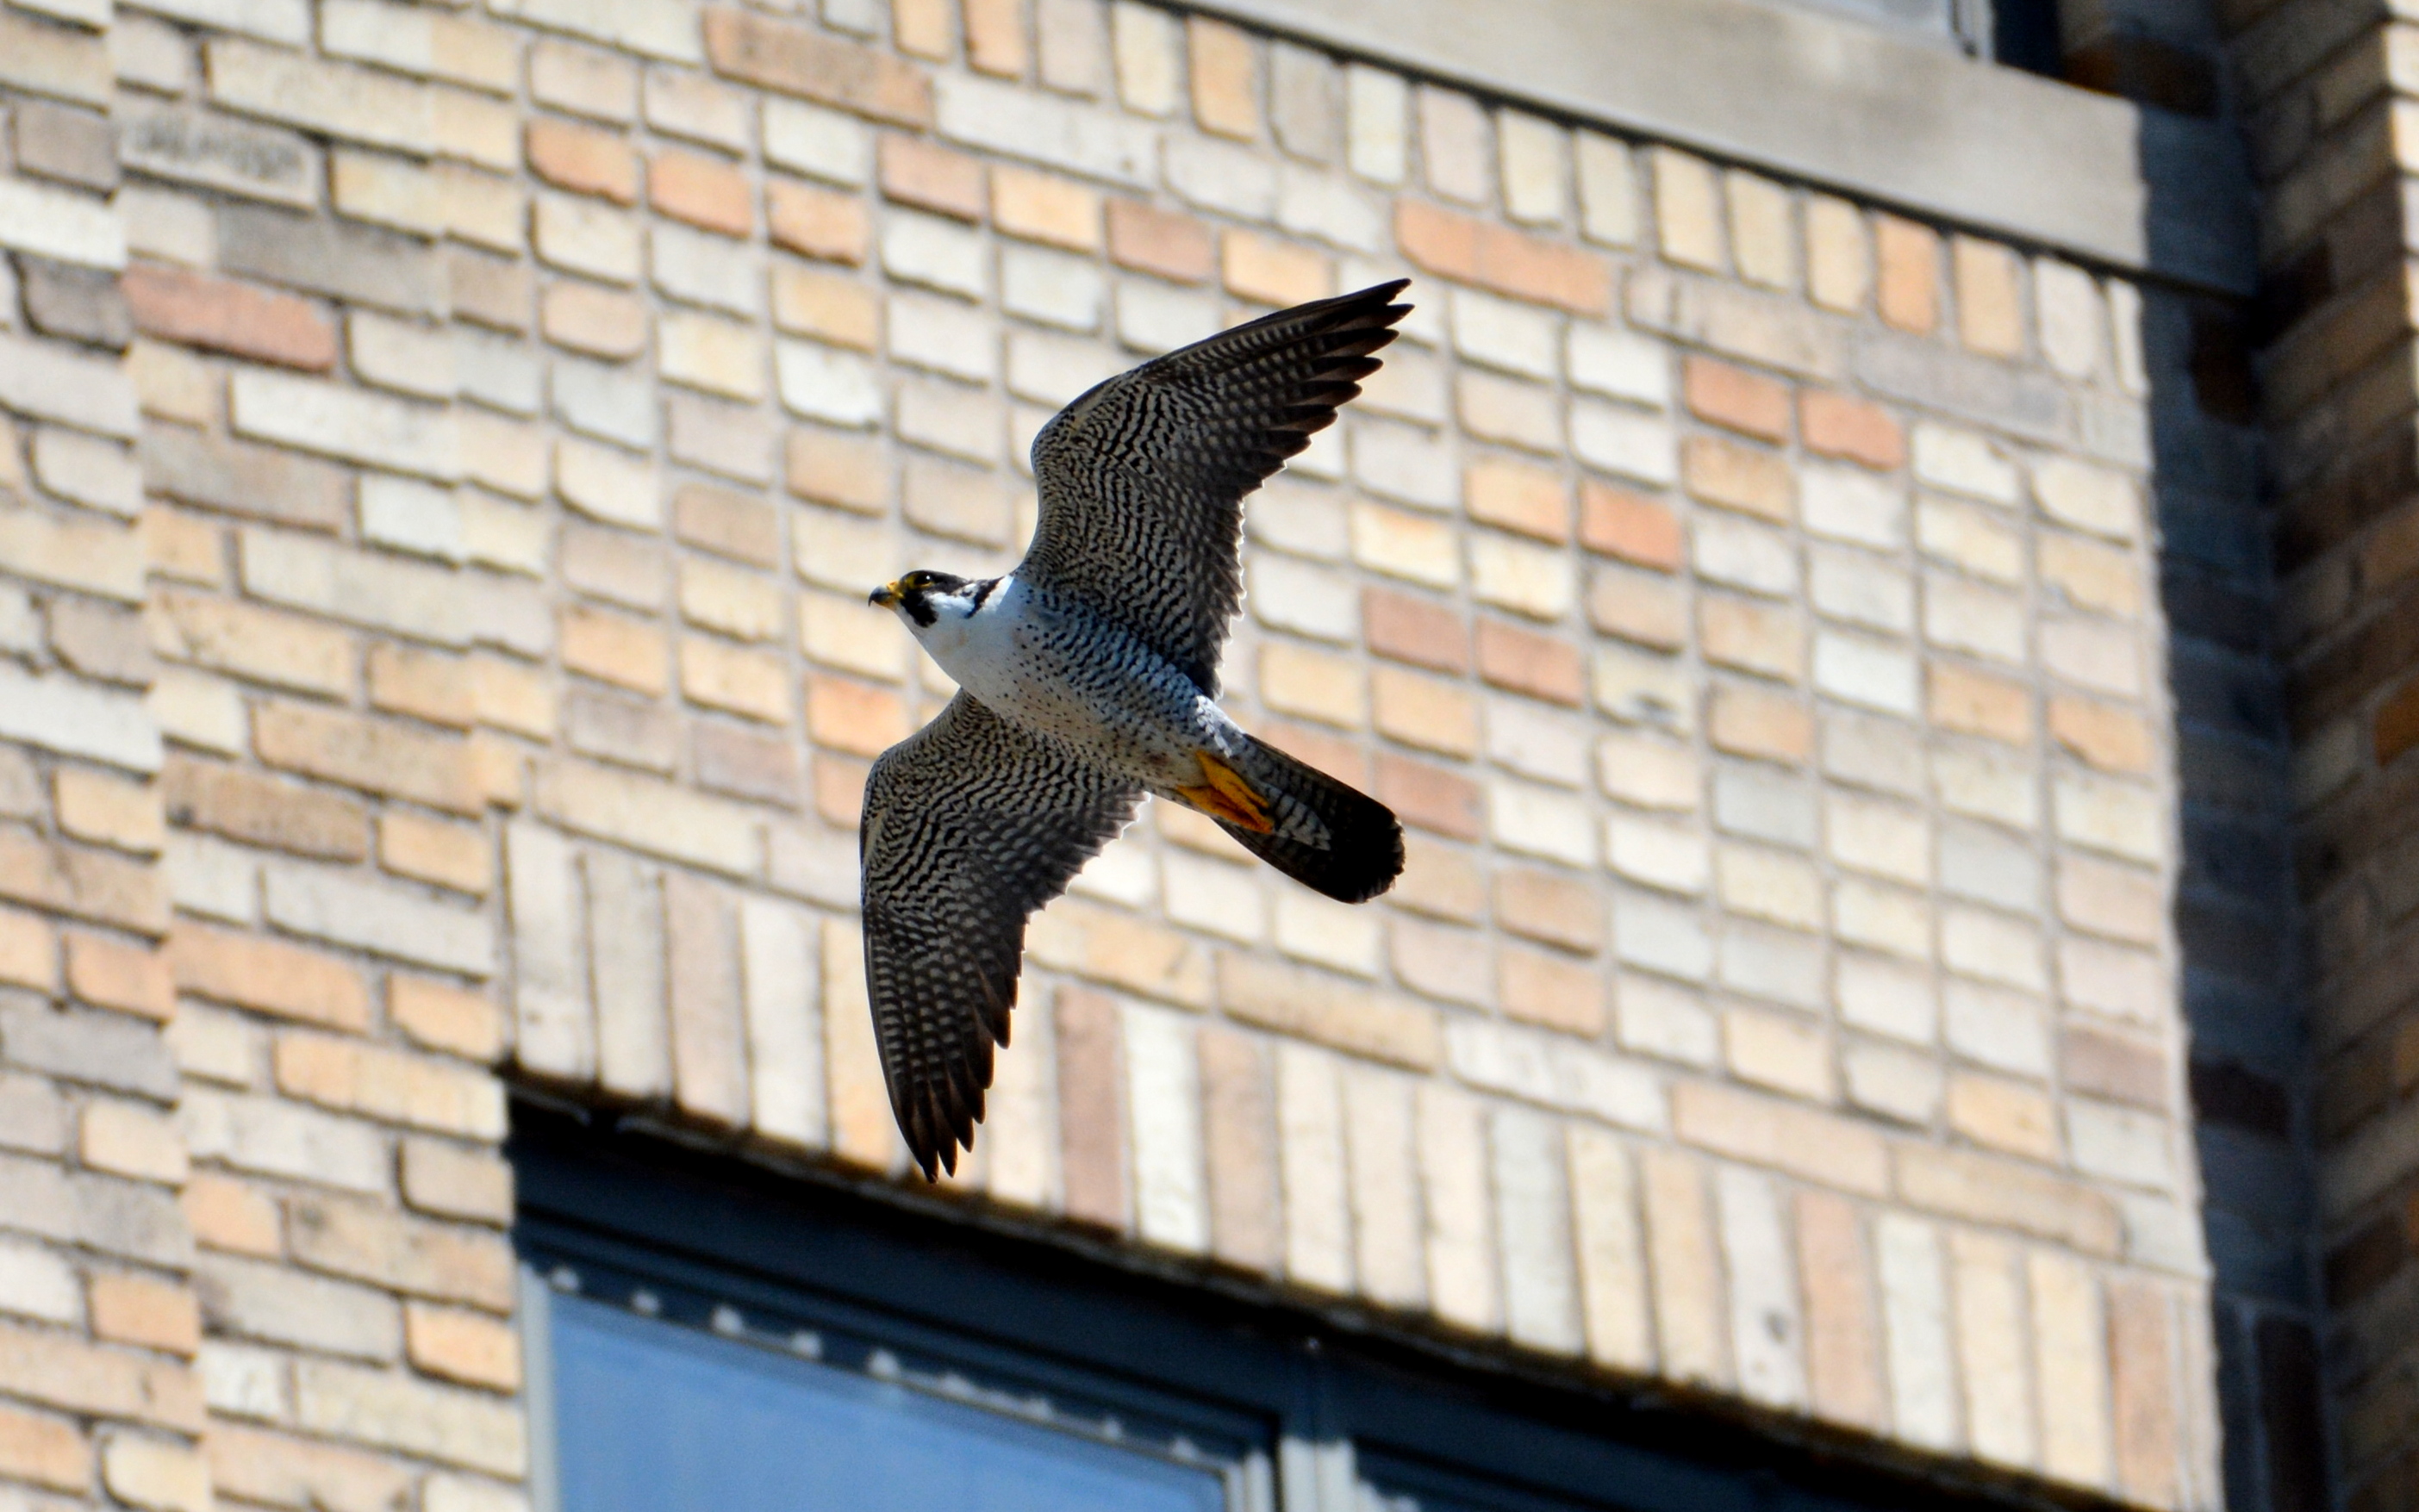 Ares flies up to a window ledge on the east side of the AKD Bank